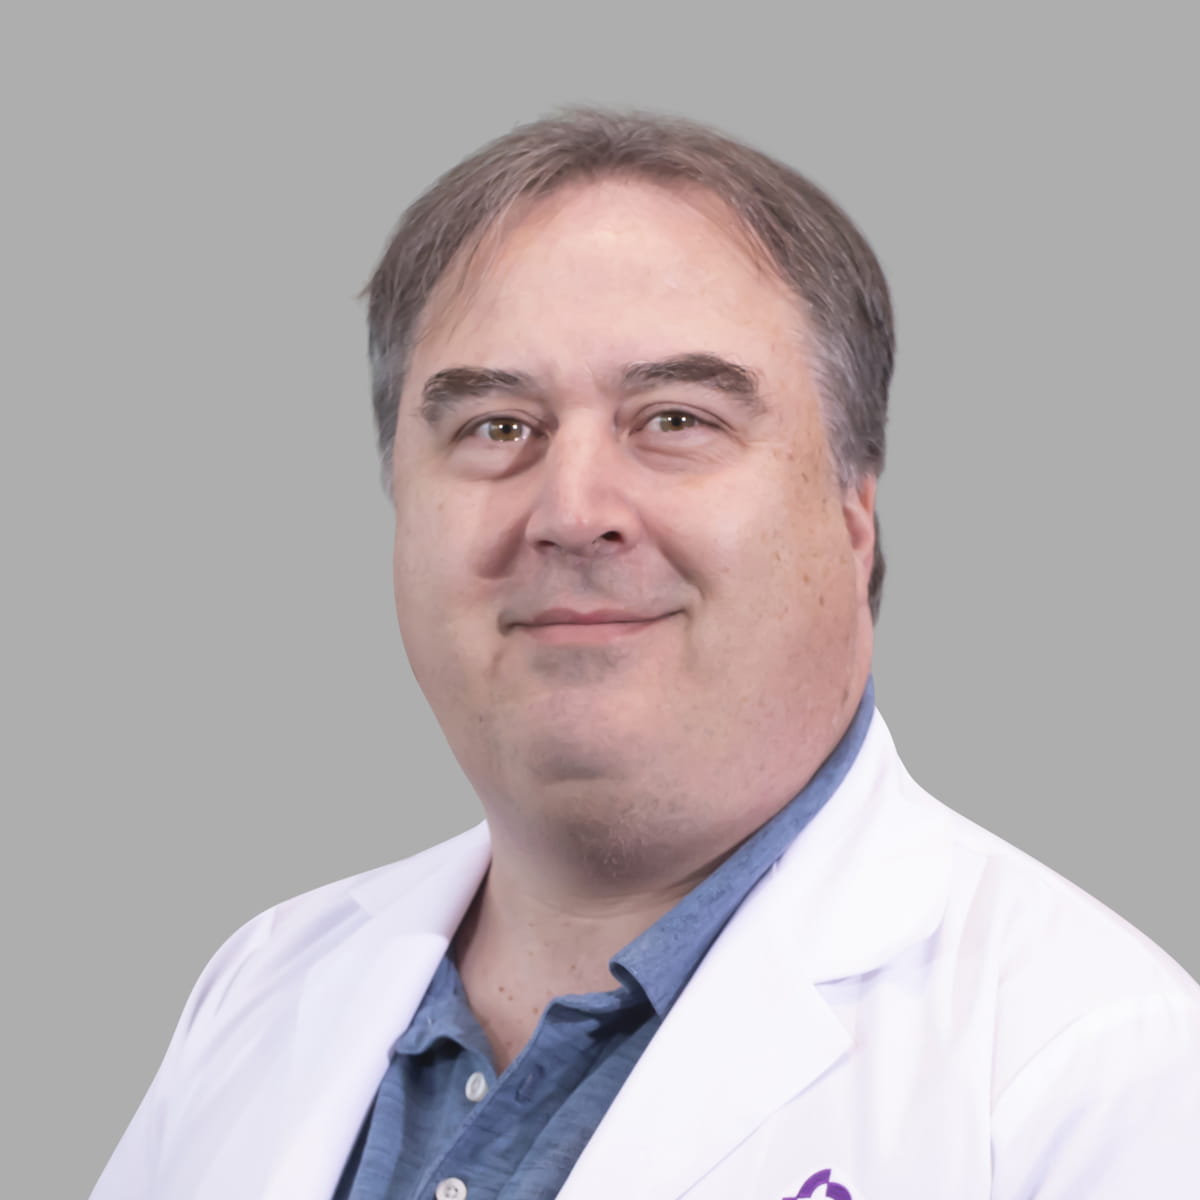 A friendly image of Jeff Cox, MD